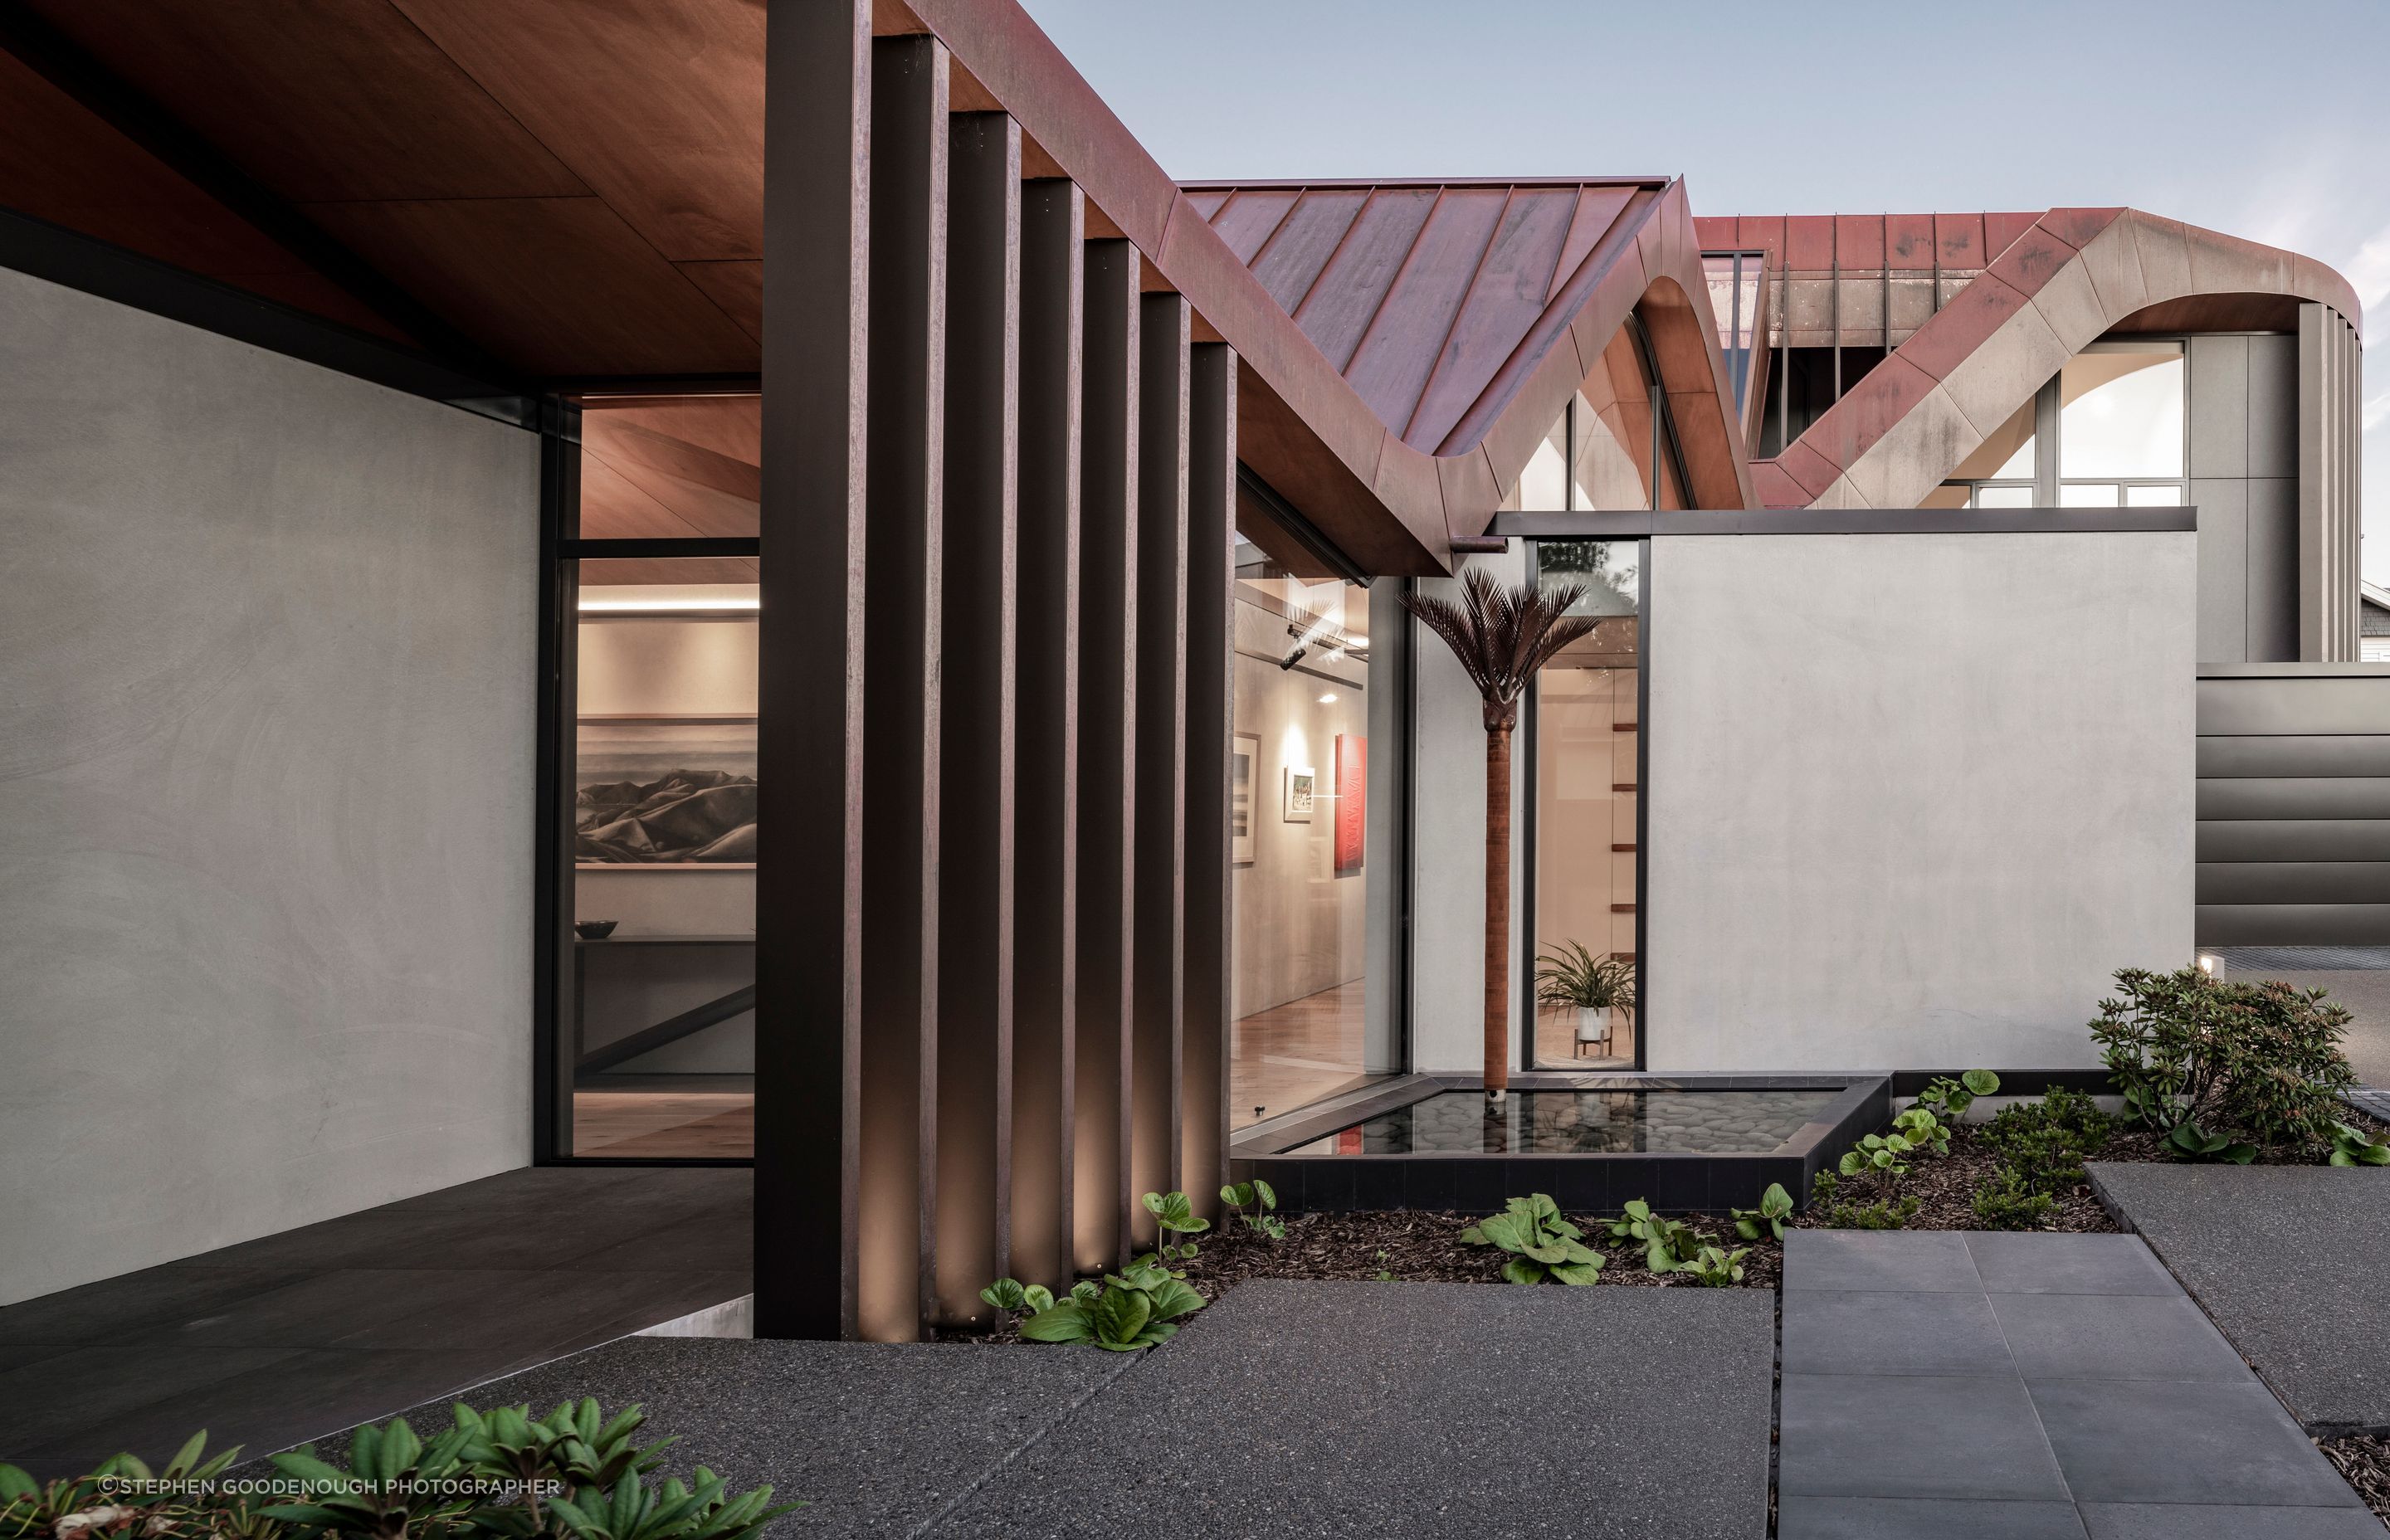 The 651 oxide colours the standard aggregate concrete to a soothing pale grey in the spectacular Concrete Copper house in Christchurch.